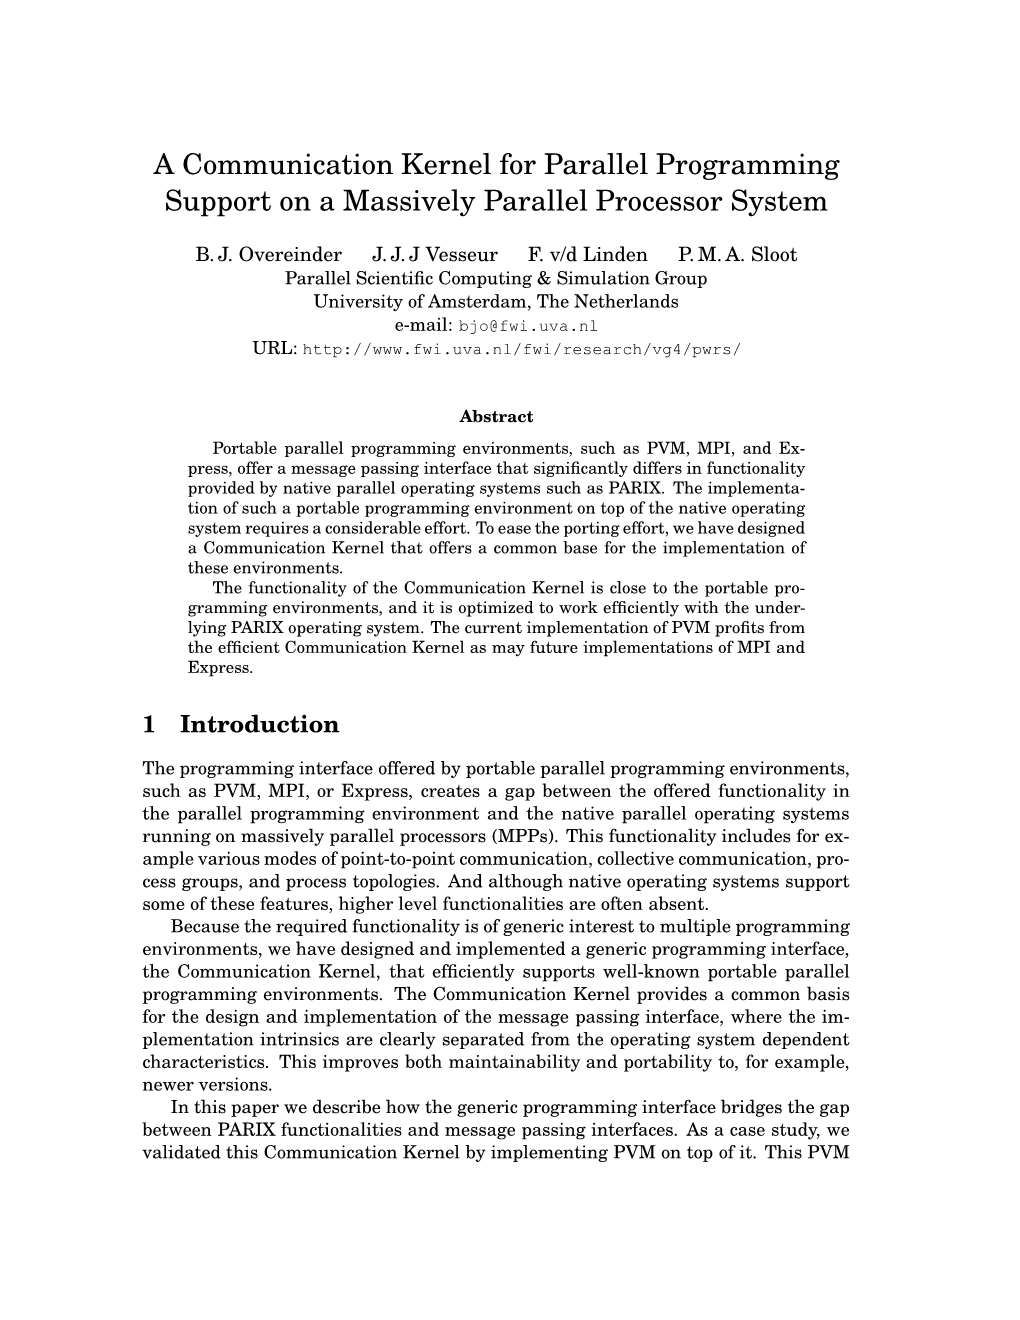 A Communication Kernel for Parallel Programming Support on a Massively Parallel Processor System